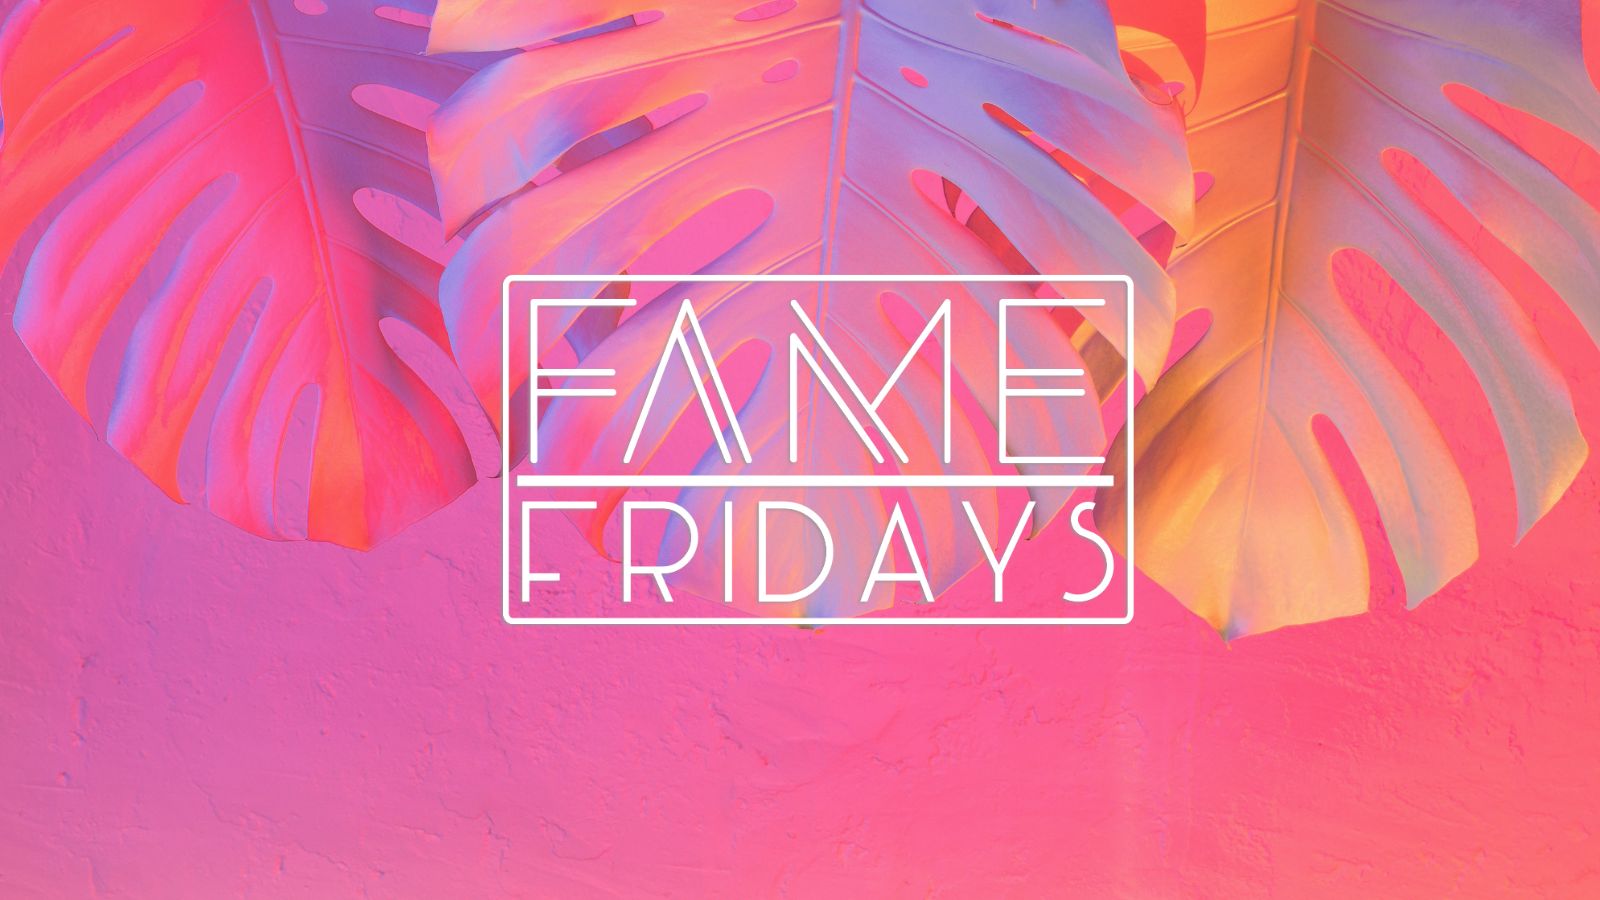 SOBAR – FAME FRIDAY’s – PAY WEEKEND